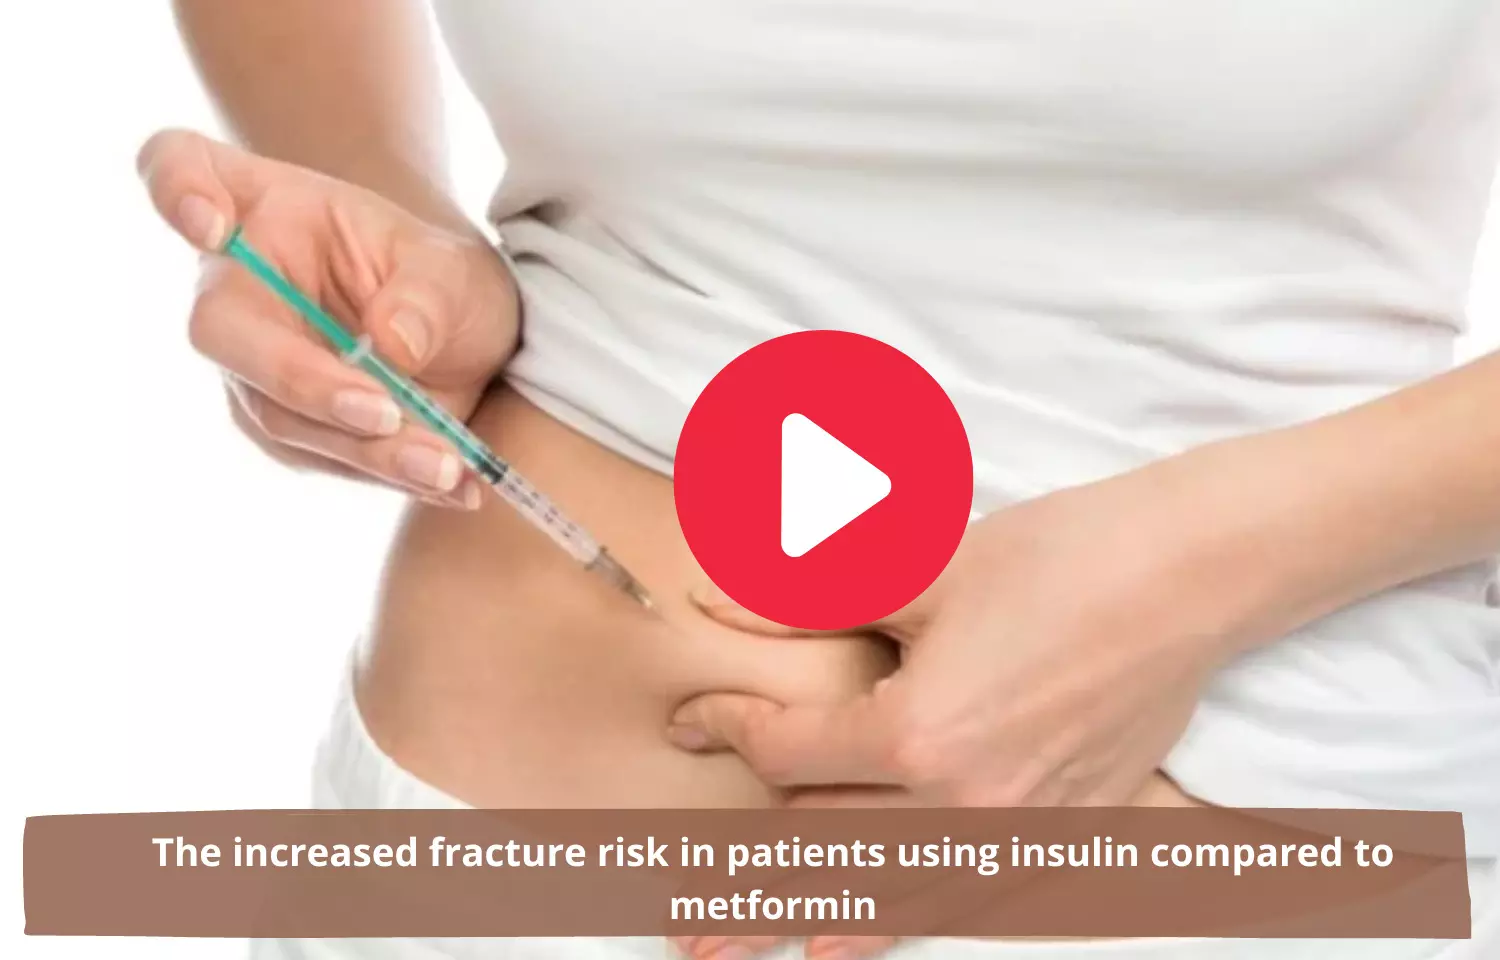 The increased fracture risk in patients using insulin compared to metformin